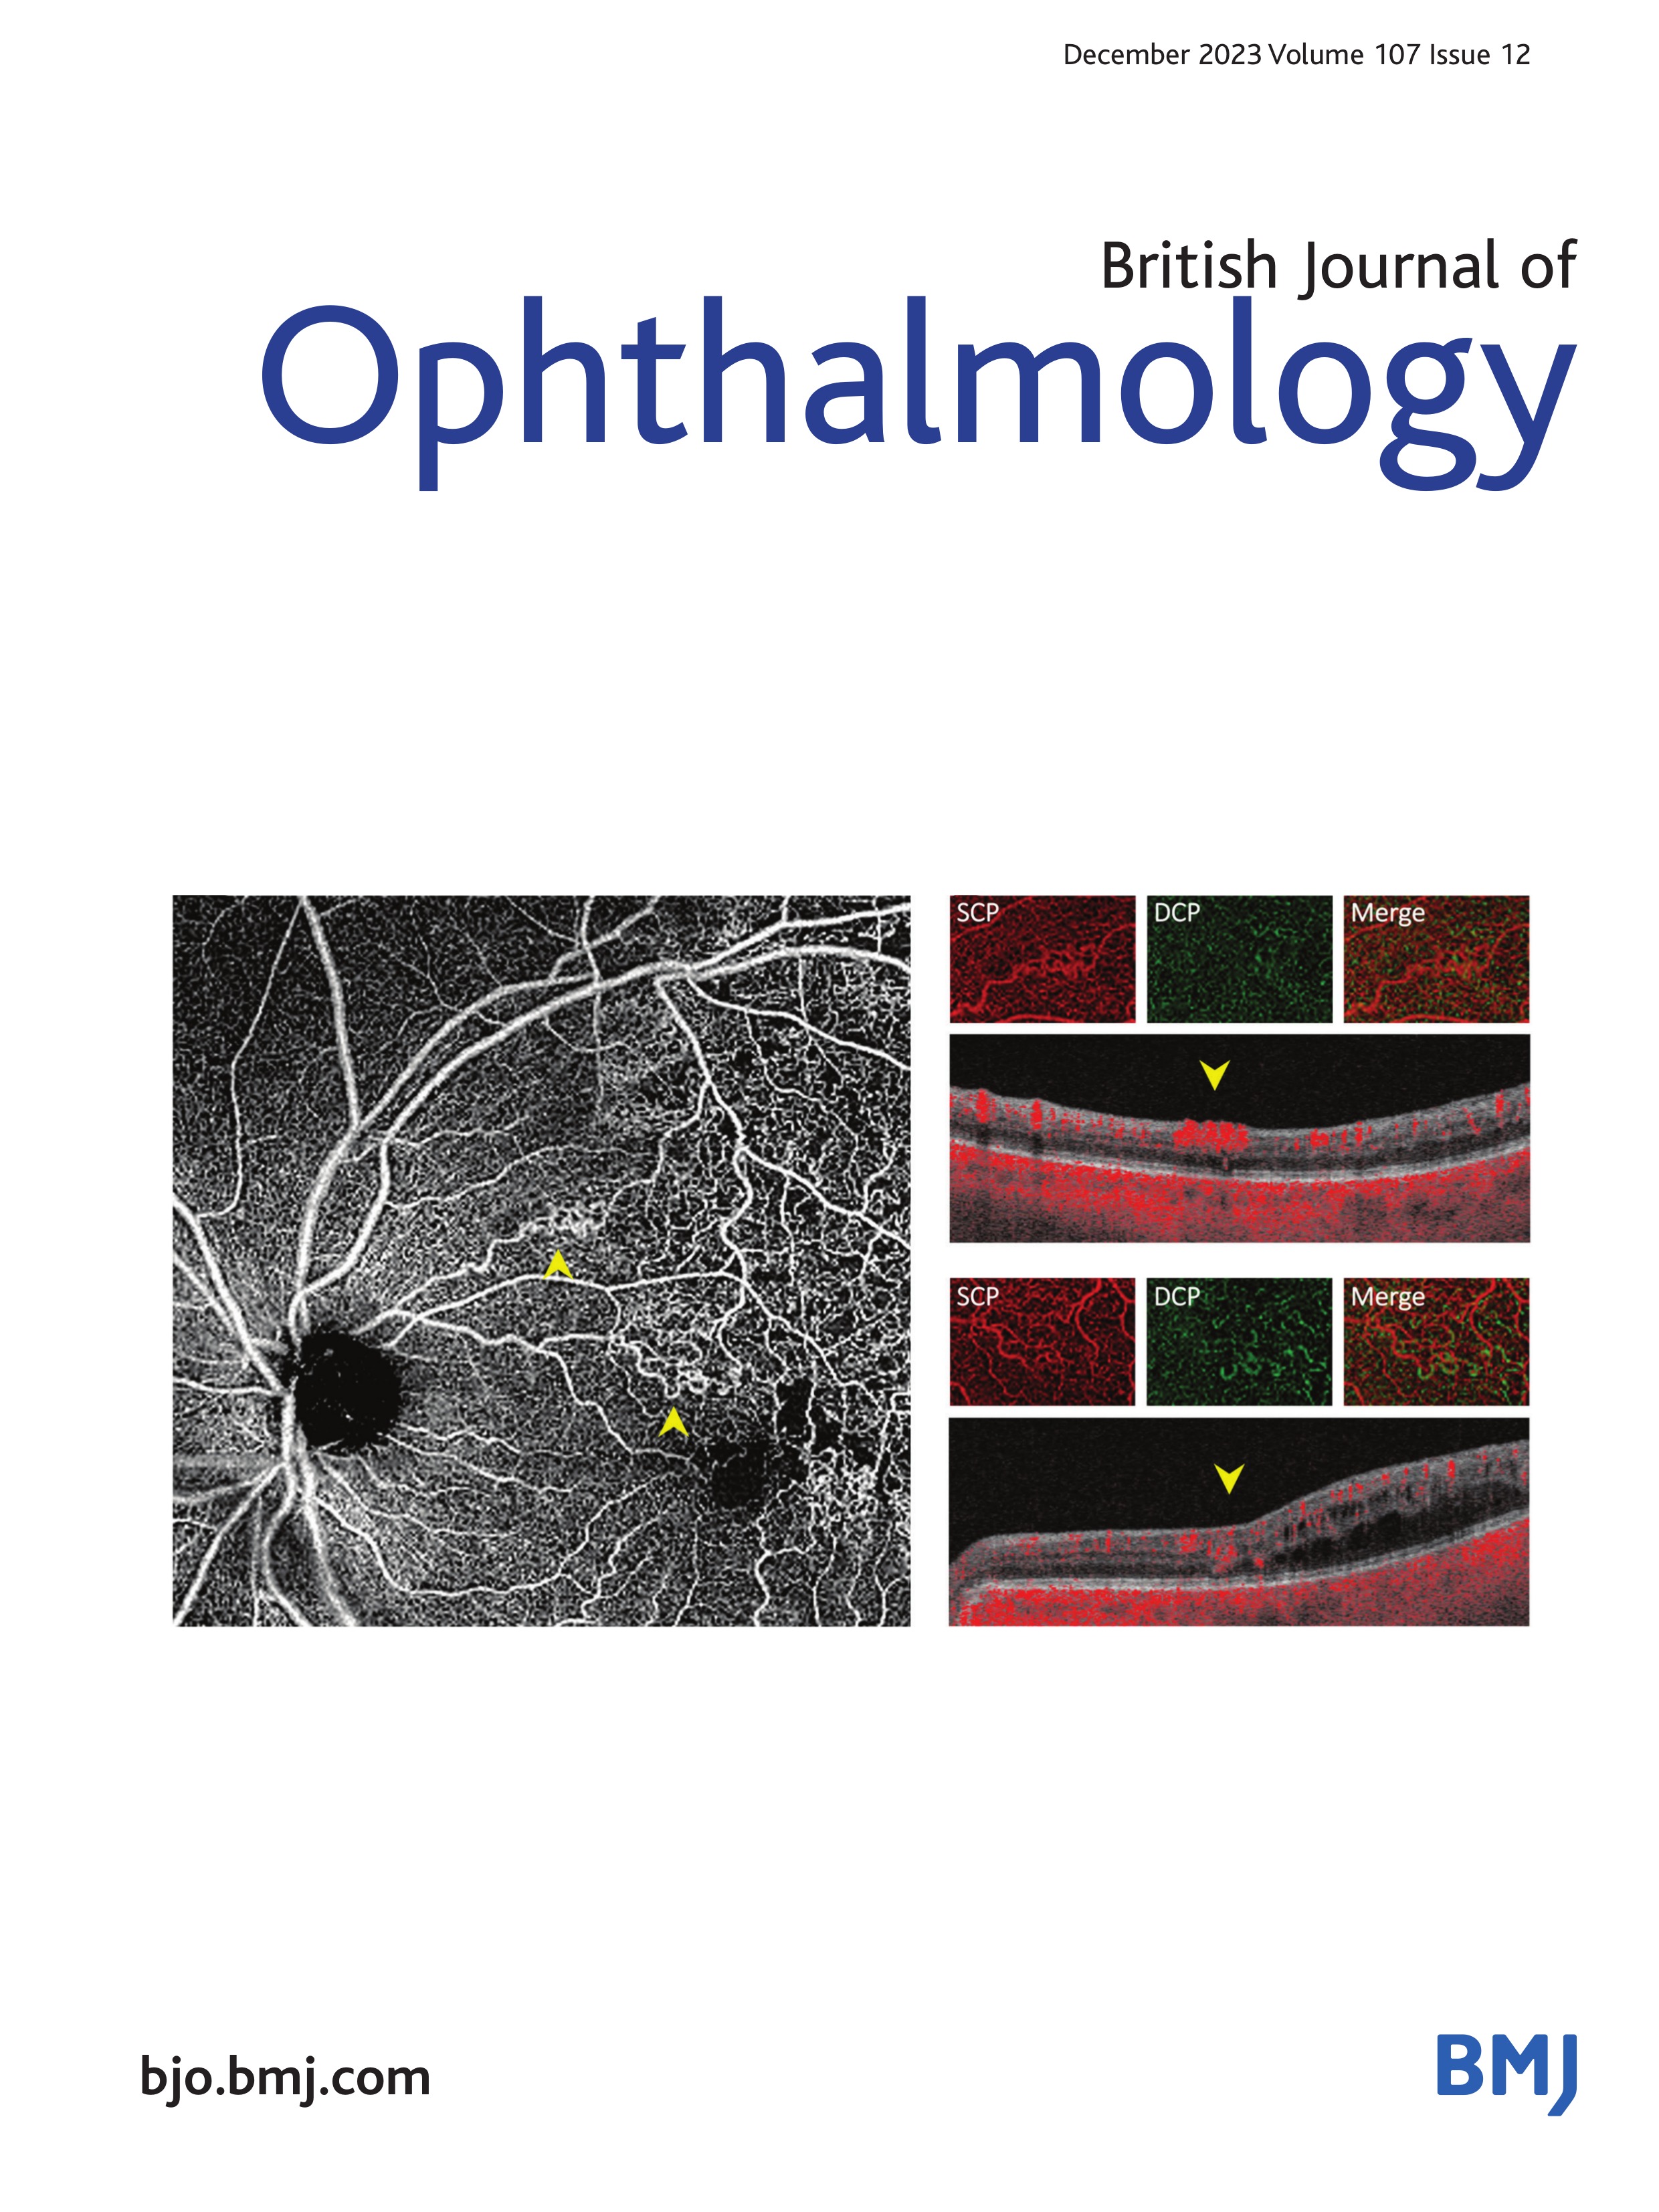 Effect of spectacle lenses with aspherical lenslets on choroidal thickness in myopic children: a 2-year randomised clinical trial